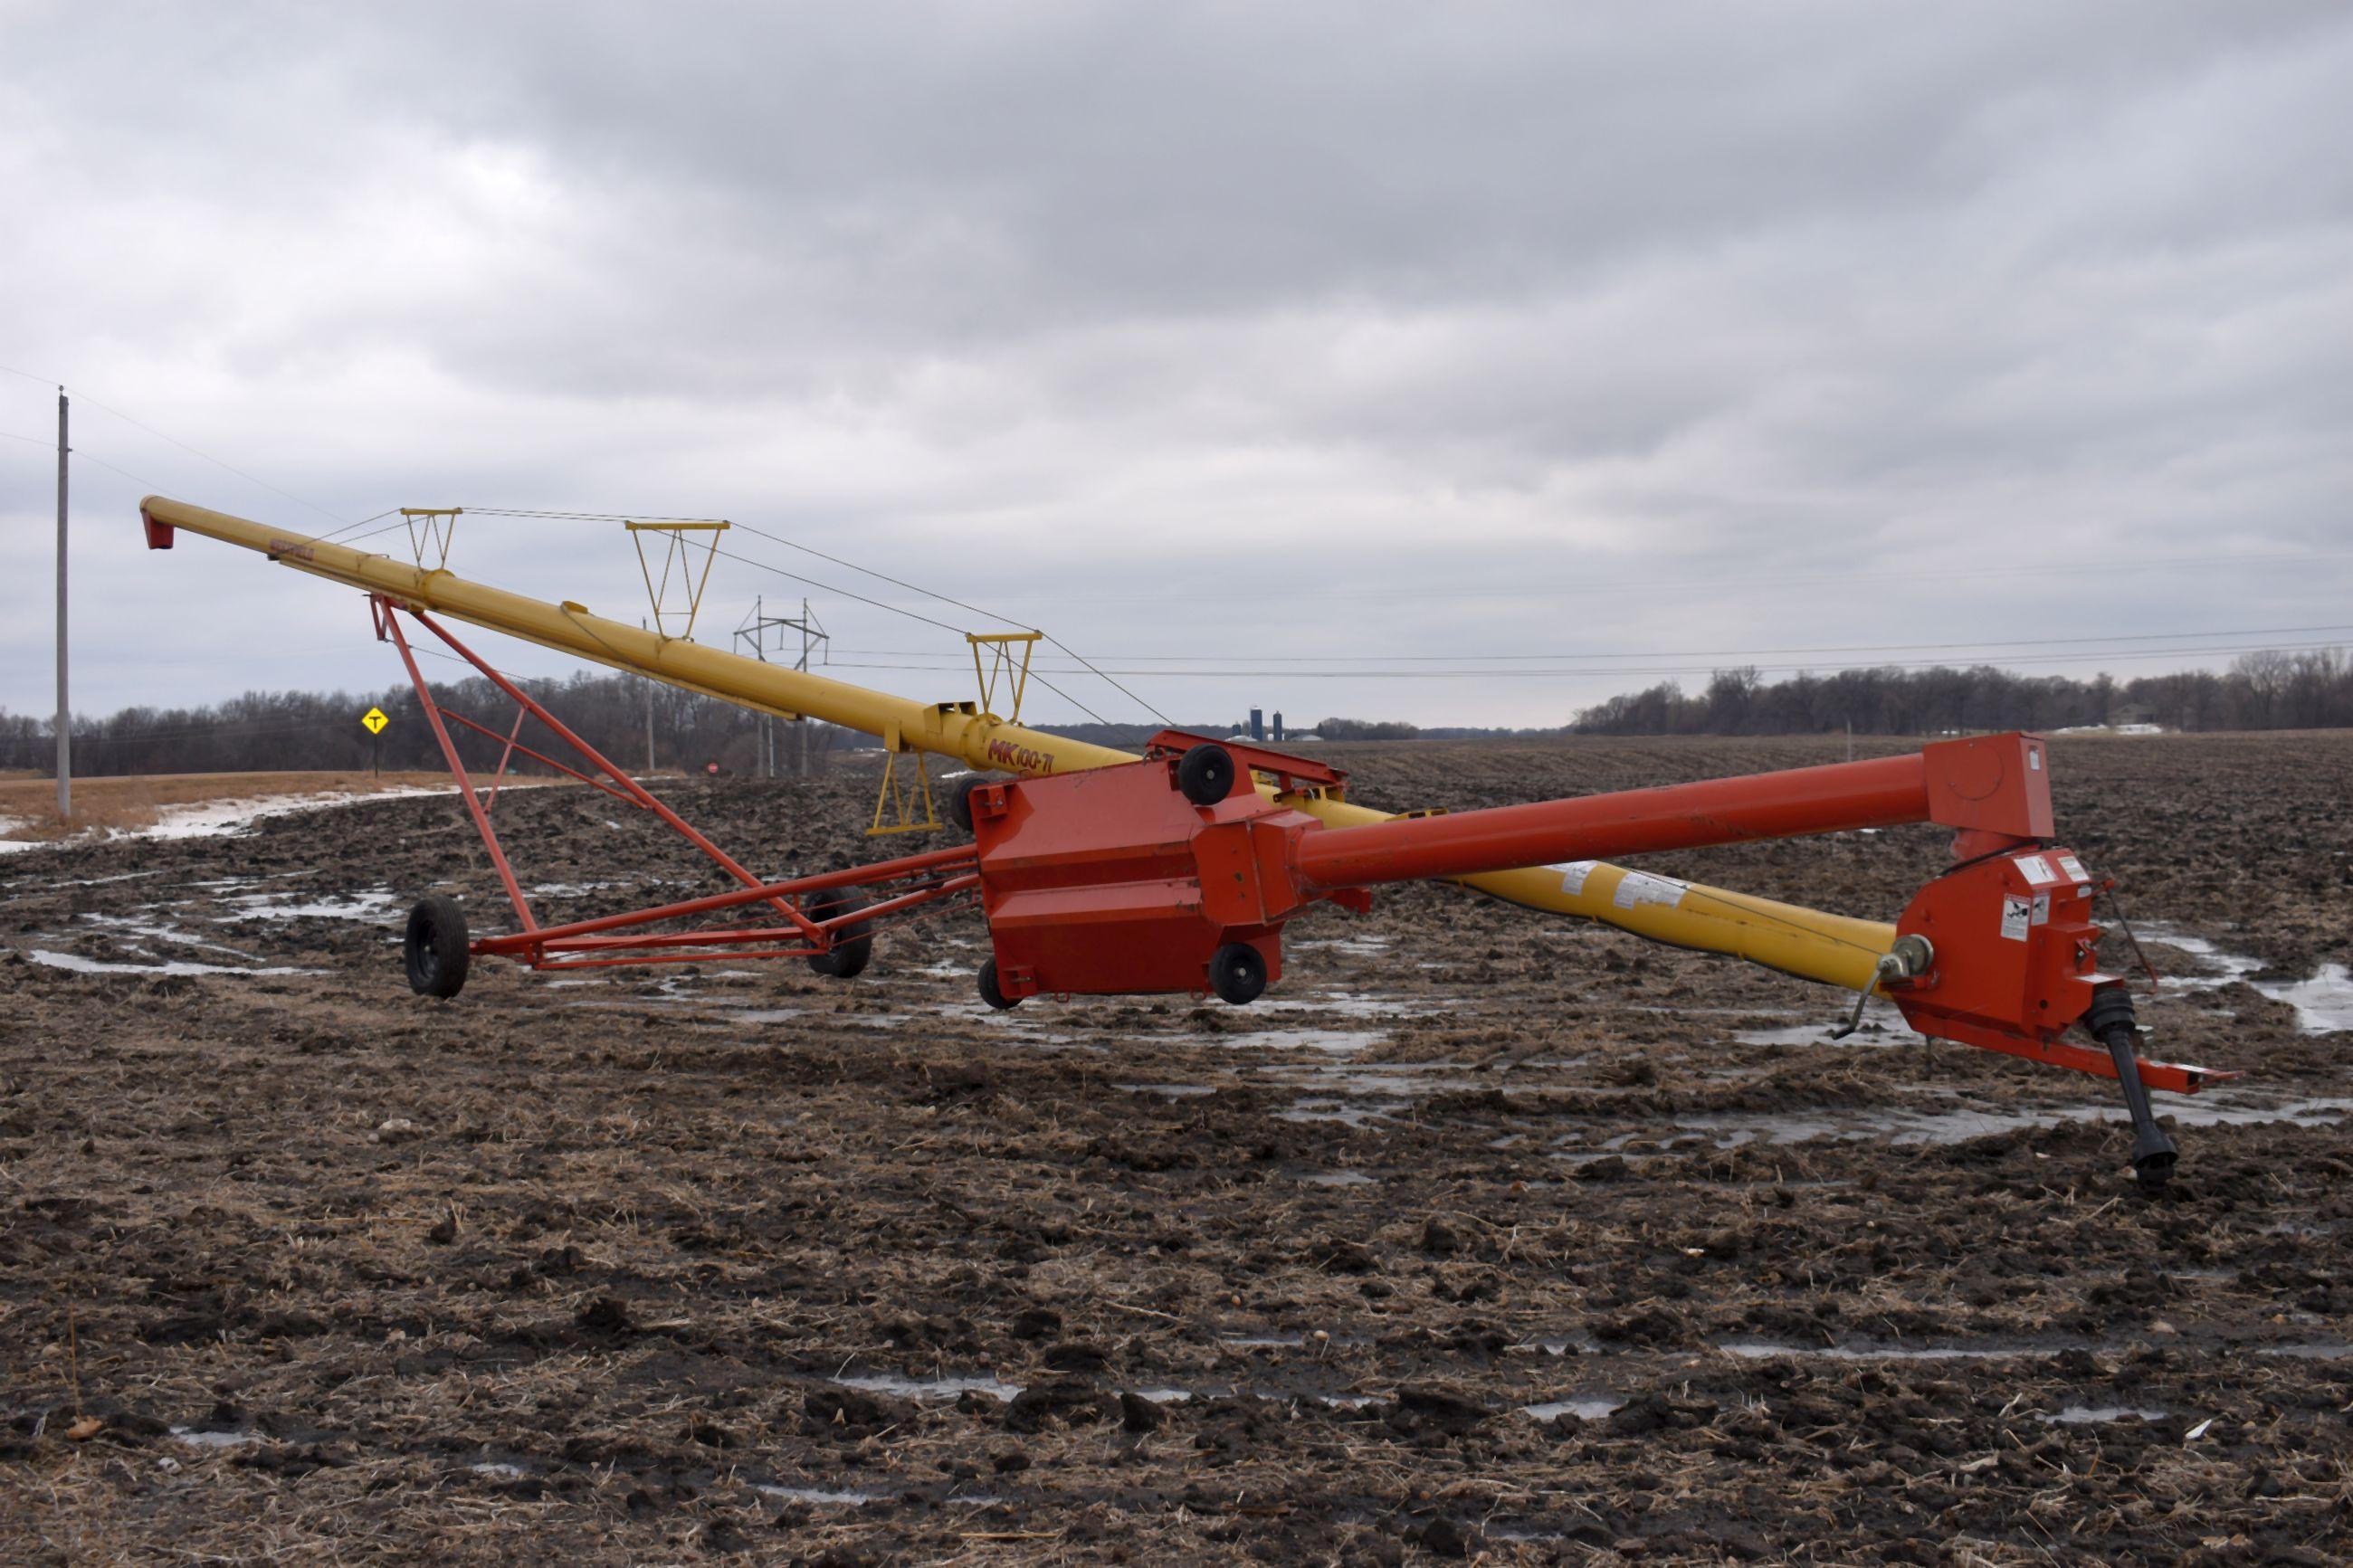 Westfield MK 100-71 Swing Hopper Auger, Hyd. Lift, 540 PTO, Good Condition, SN: 178919